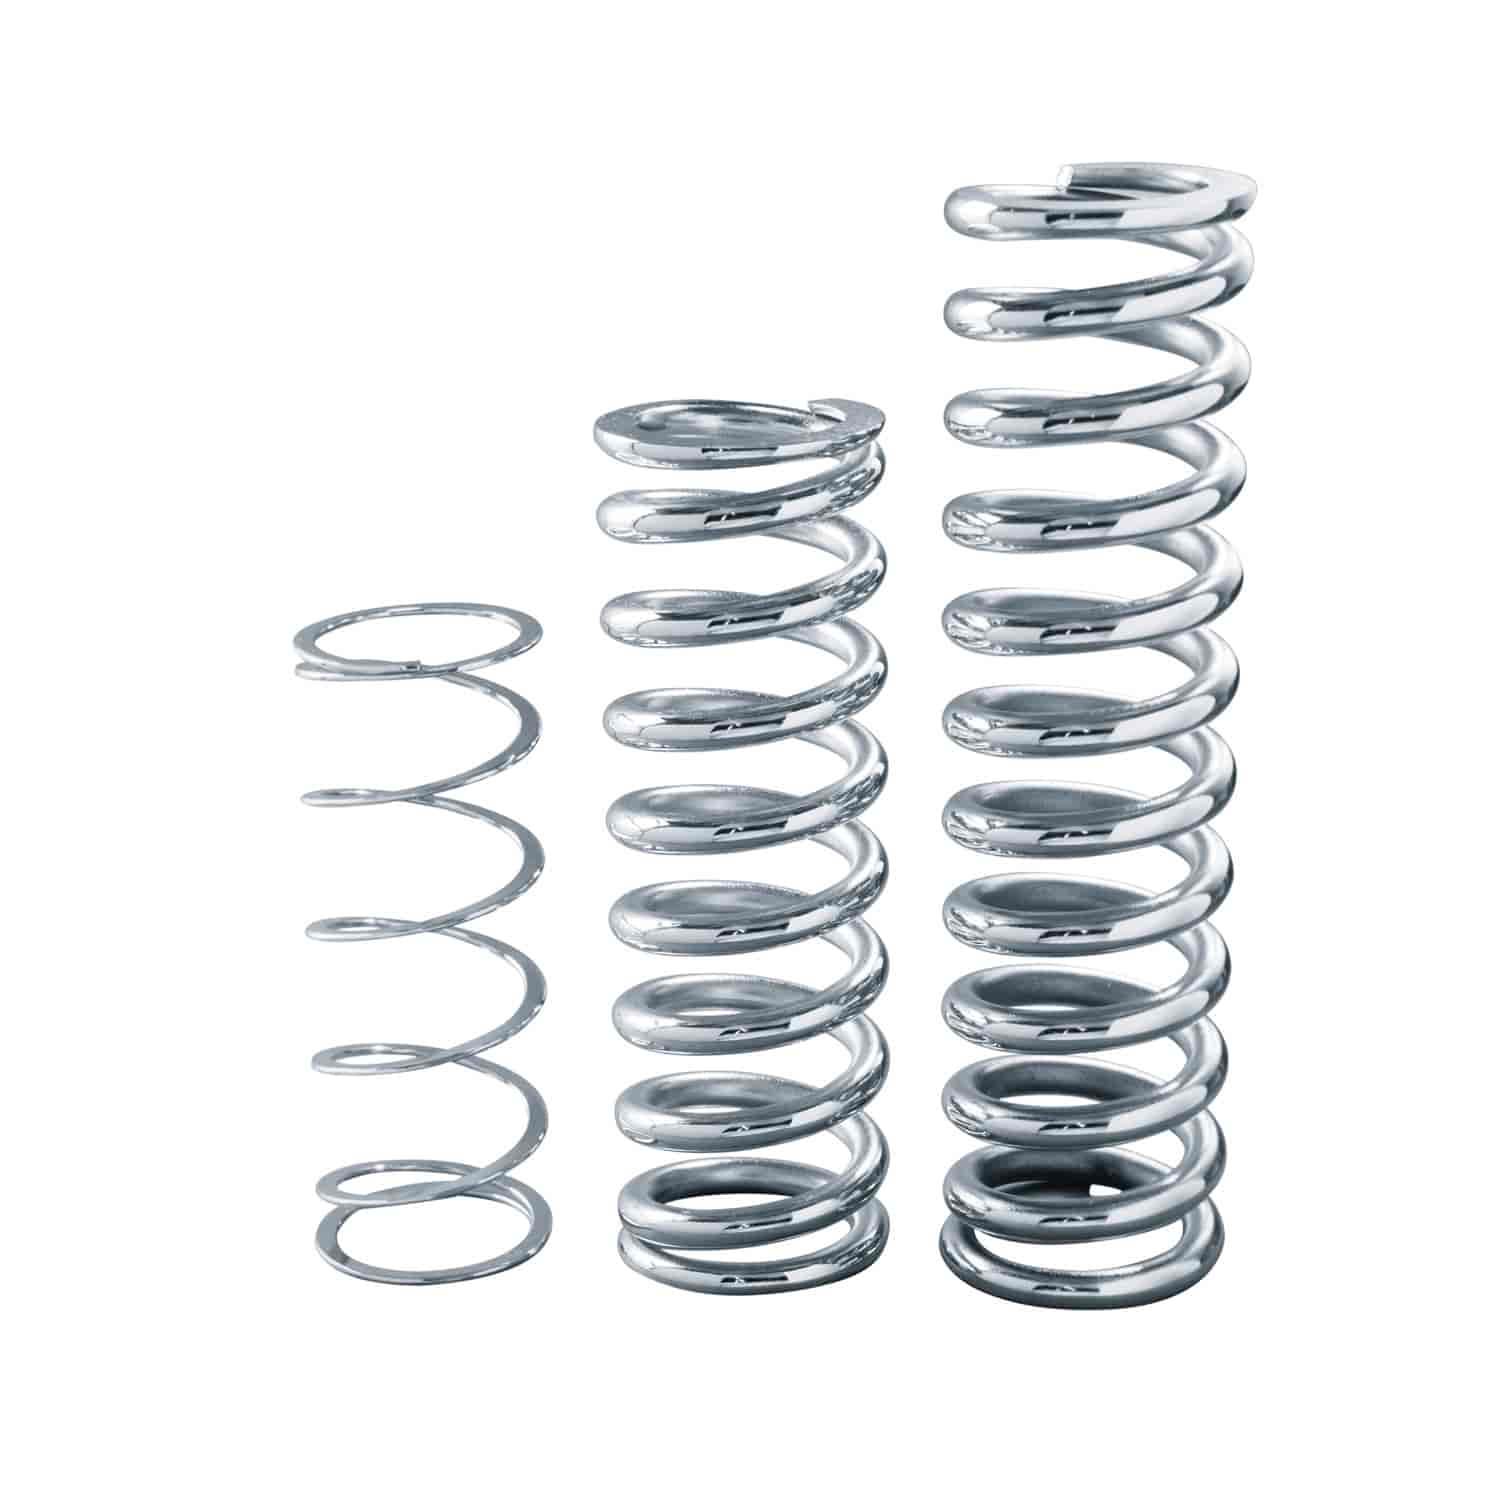 8" Polished Chrome Coil Spring Rate: 175 lbs